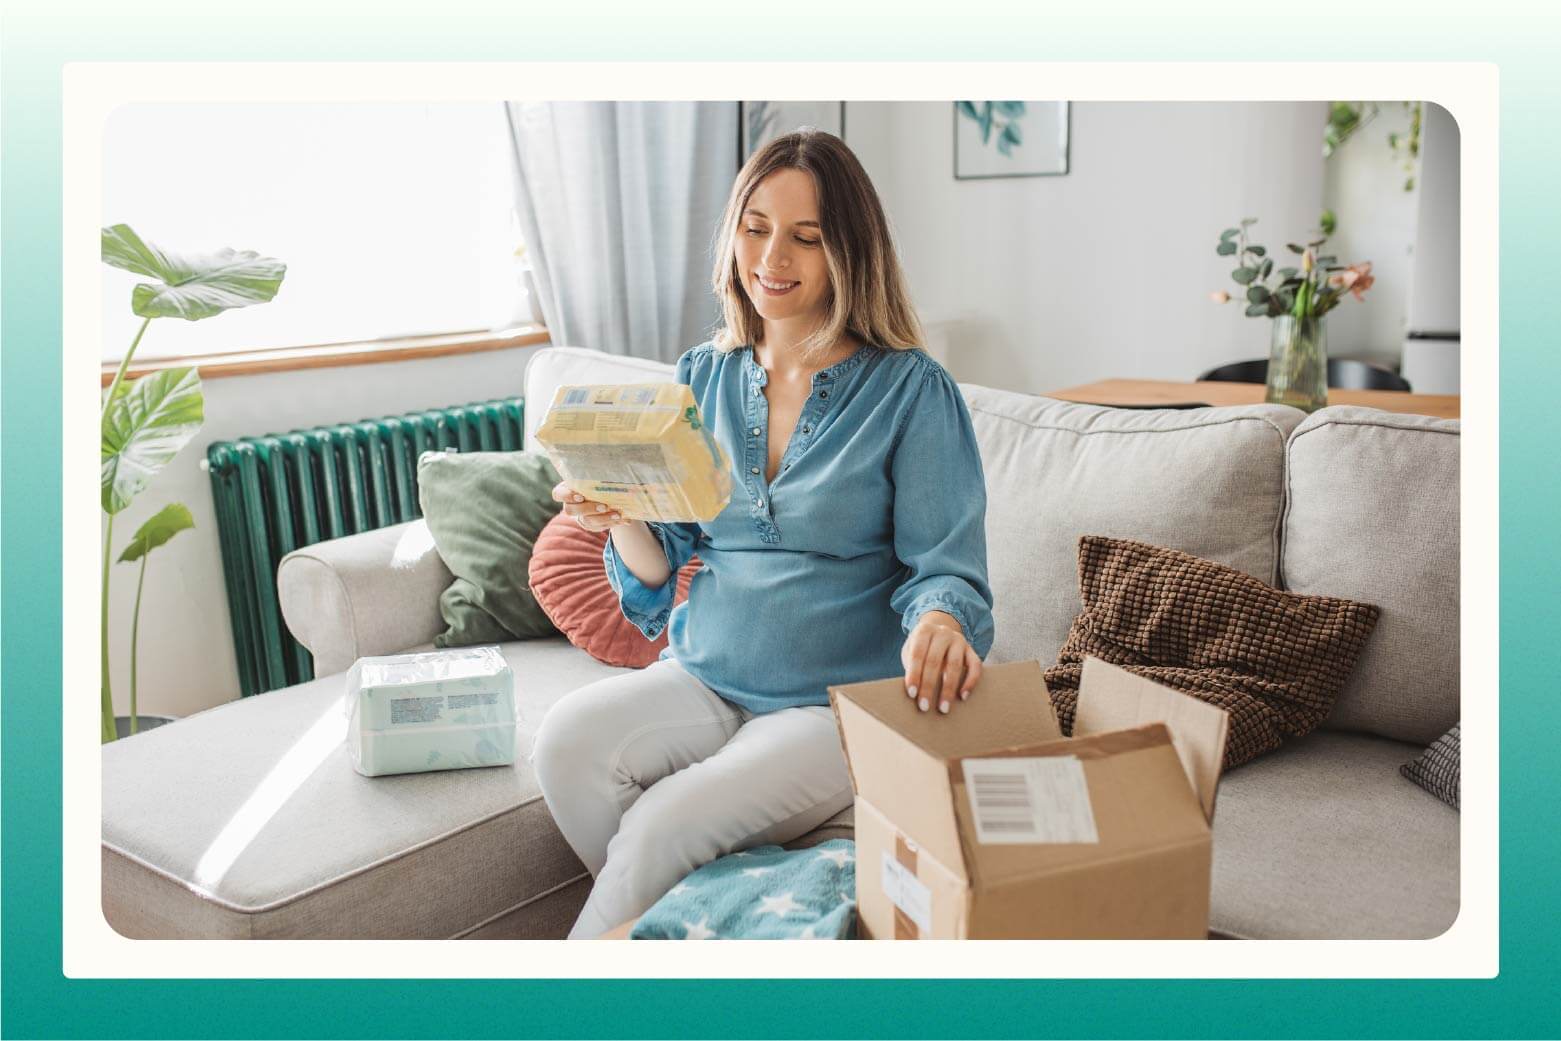 woman on sofa looking at package of diapers she pulled out of brown box next to her